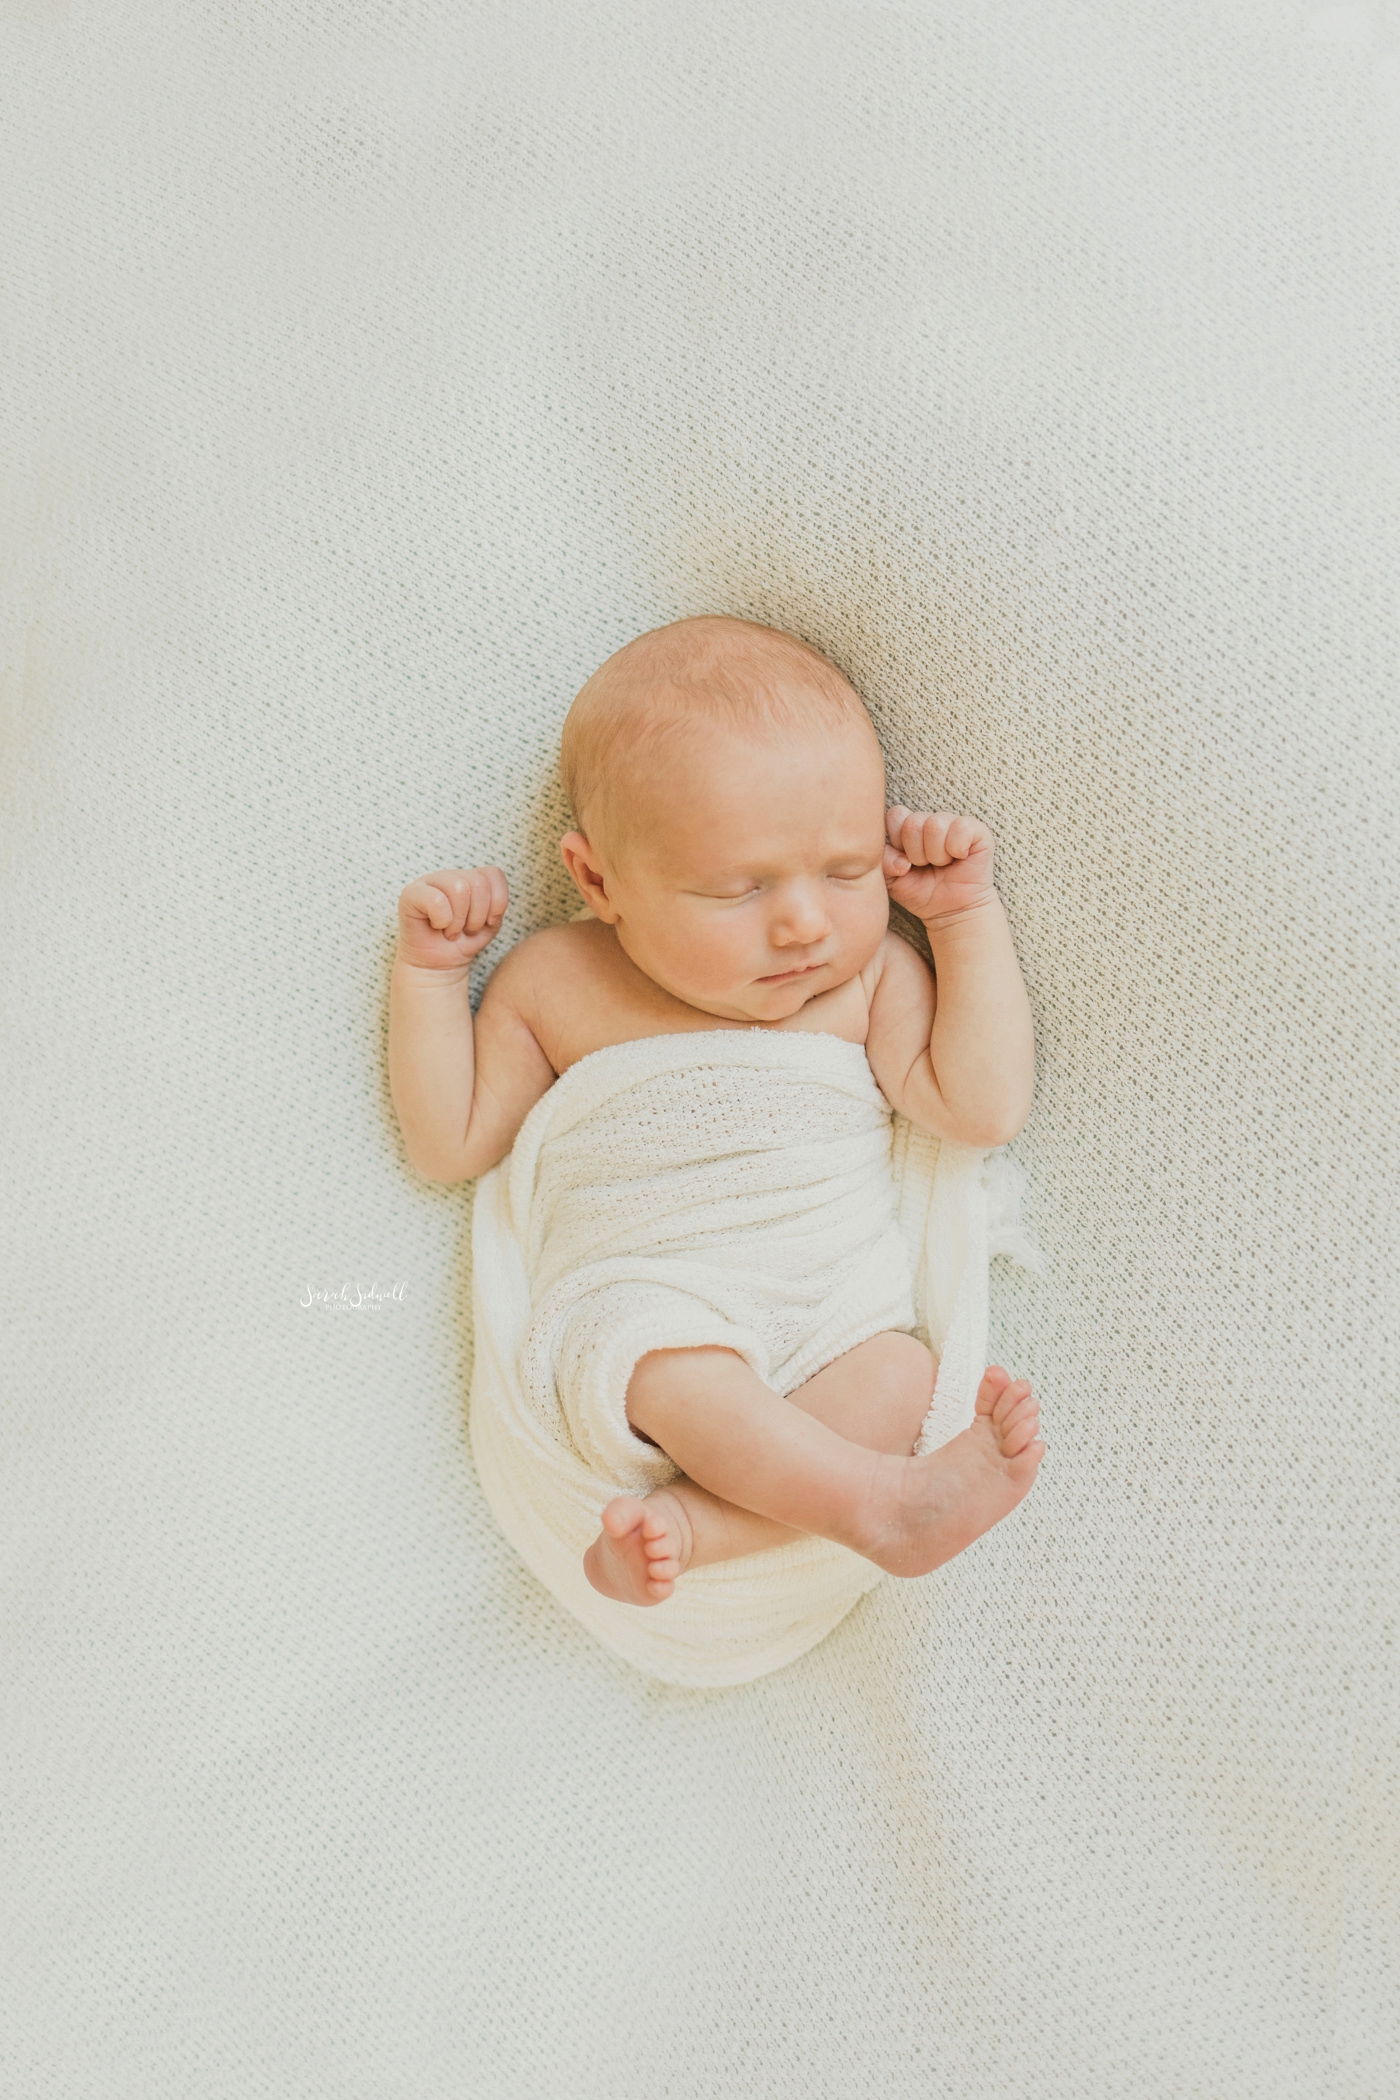 A baby folds her legs in her sleep | Home Newborn Session